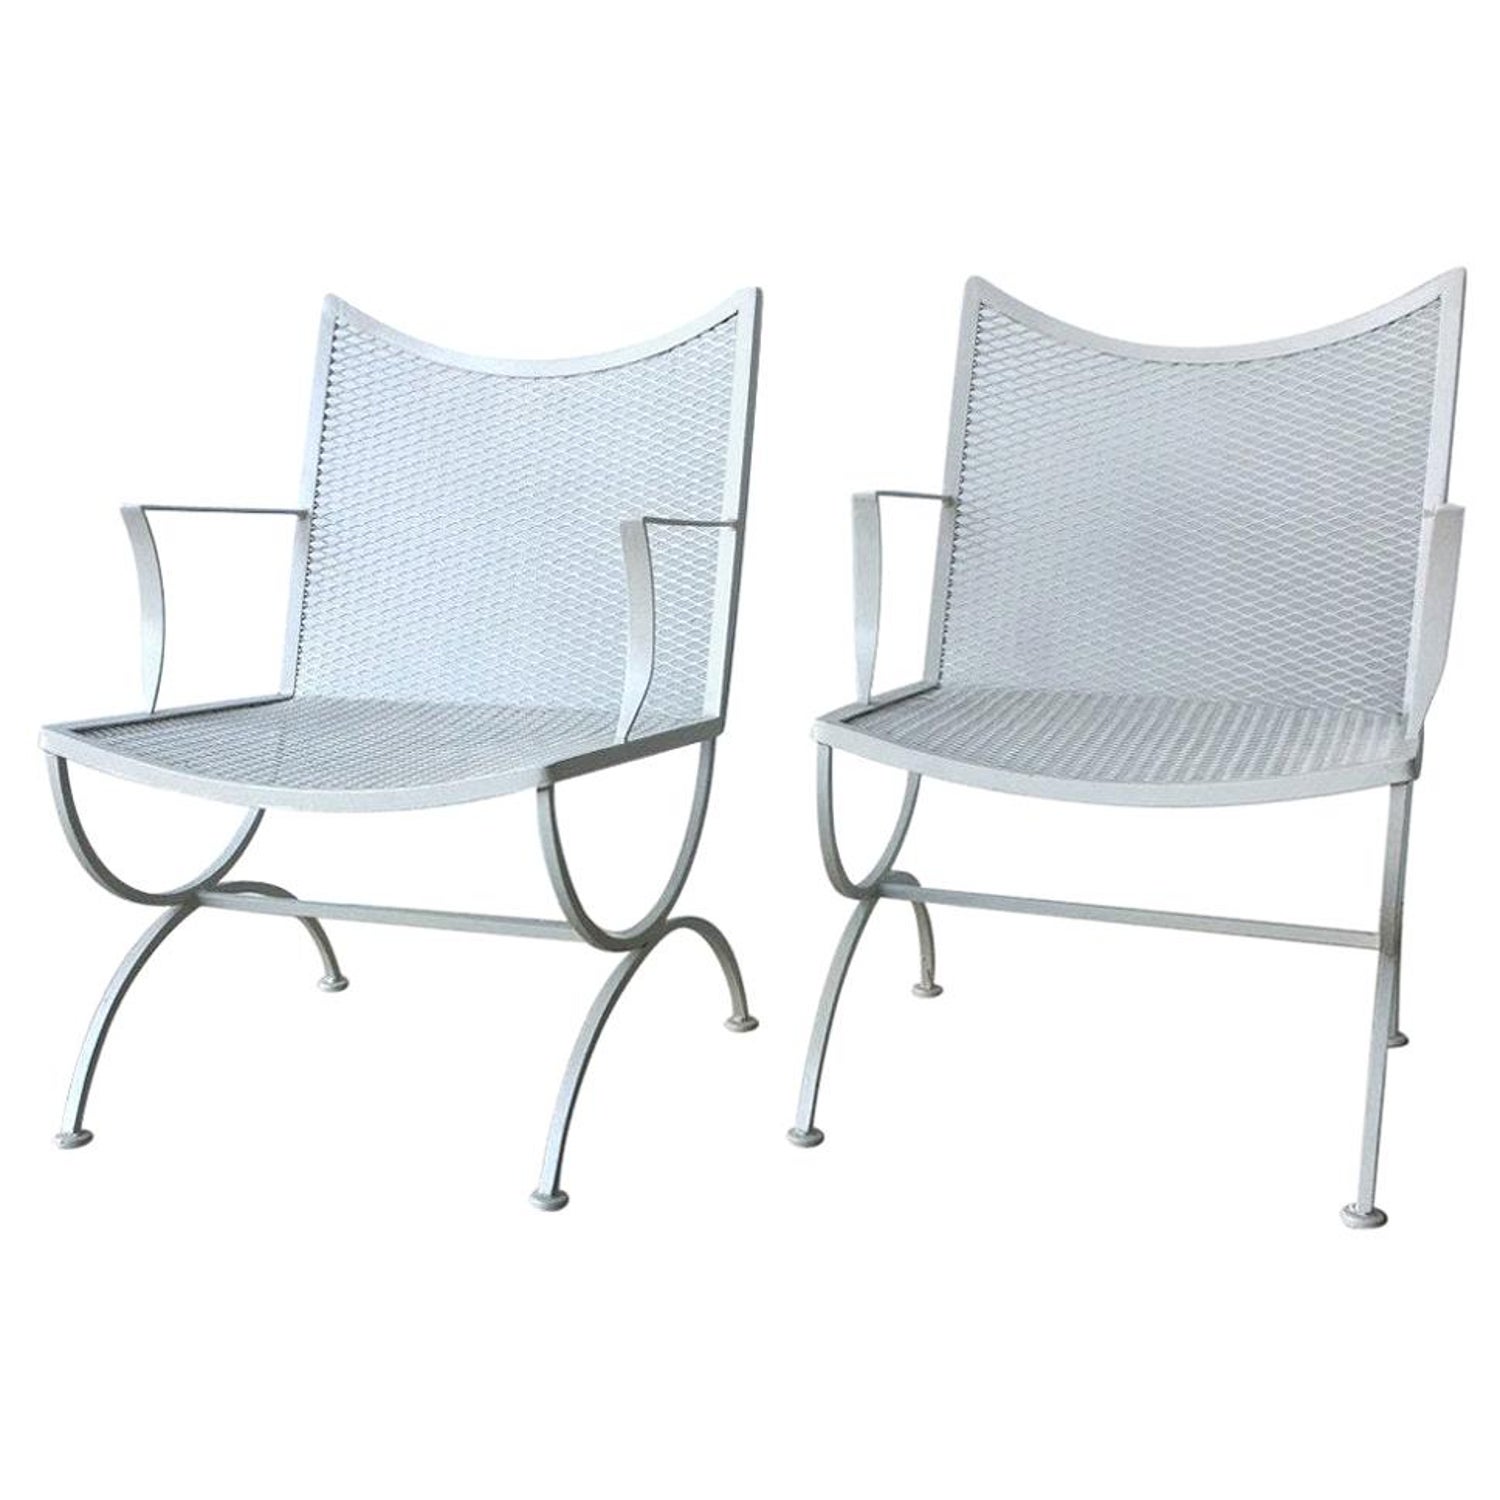 Bob Anderson Patio And Garden Furniture 5 For Sale At 1stdibs